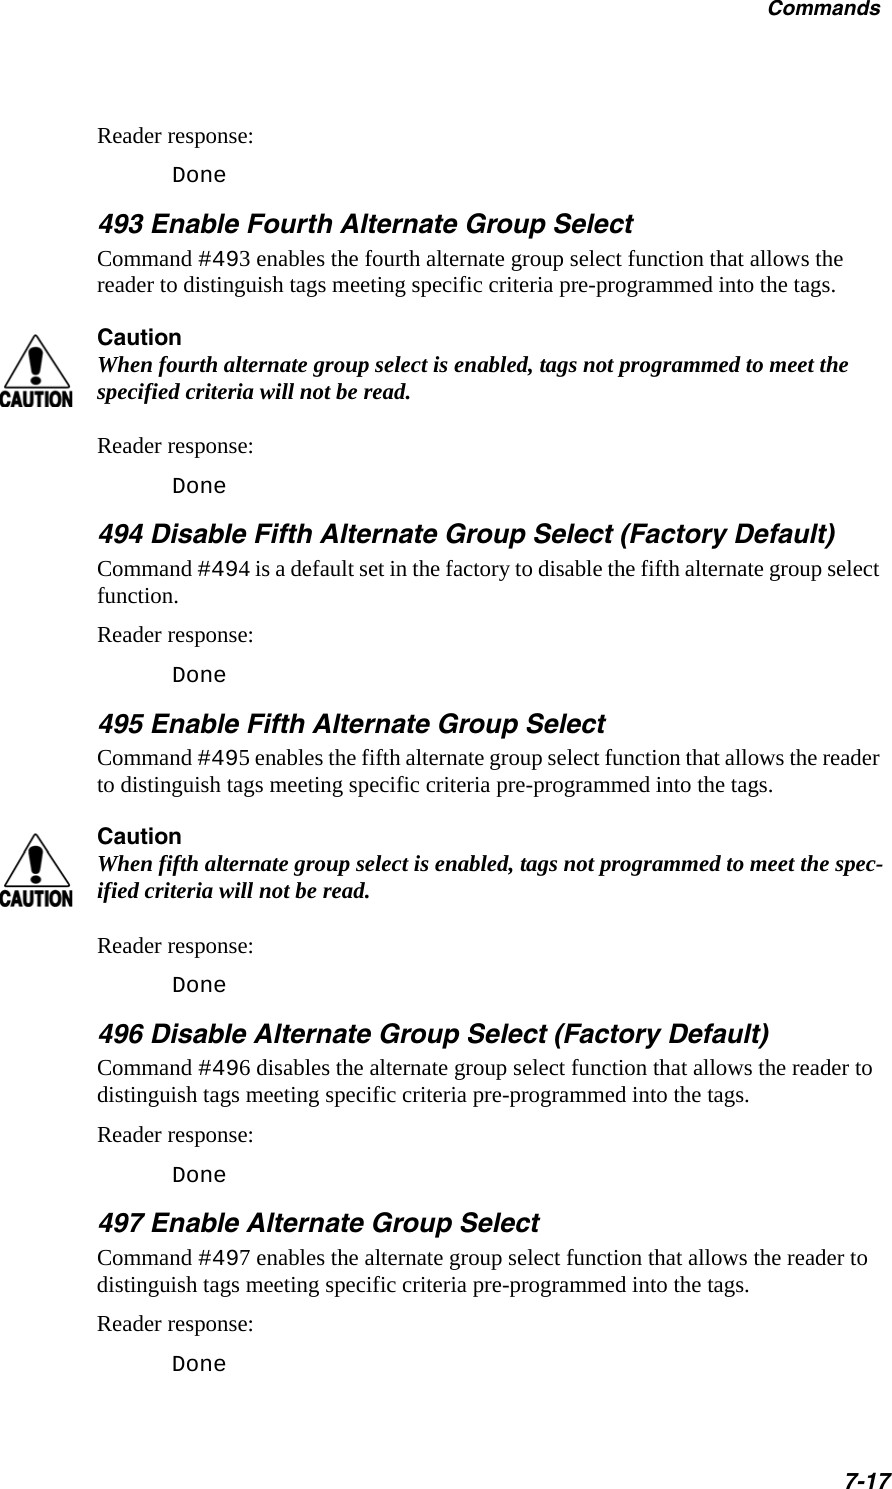 Commands7-17Reader response:Done493 Enable Fourth Alternate Group SelectCommand #493 enables the fourth alternate group select function that allows the reader to distinguish tags meeting specific criteria pre-programmed into the tags. CautionWhen fourth alternate group select is enabled, tags not programmed to meet the specified criteria will not be read.Reader response:Done 494 Disable Fifth Alternate Group Select (Factory Default)Command #494 is a default set in the factory to disable the fifth alternate group select function. Reader response:Done495 Enable Fifth Alternate Group SelectCommand #495 enables the fifth alternate group select function that allows the reader to distinguish tags meeting specific criteria pre-programmed into the tags. CautionWhen fifth alternate group select is enabled, tags not programmed to meet the spec-ified criteria will not be read.Reader response:Done  496 Disable Alternate Group Select (Factory Default)Command #496 disables the alternate group select function that allows the reader to distinguish tags meeting specific criteria pre-programmed into the tags.Reader response:Done497 Enable Alternate Group SelectCommand #497 enables the alternate group select function that allows the reader to distinguish tags meeting specific criteria pre-programmed into the tags.Reader response:Done  